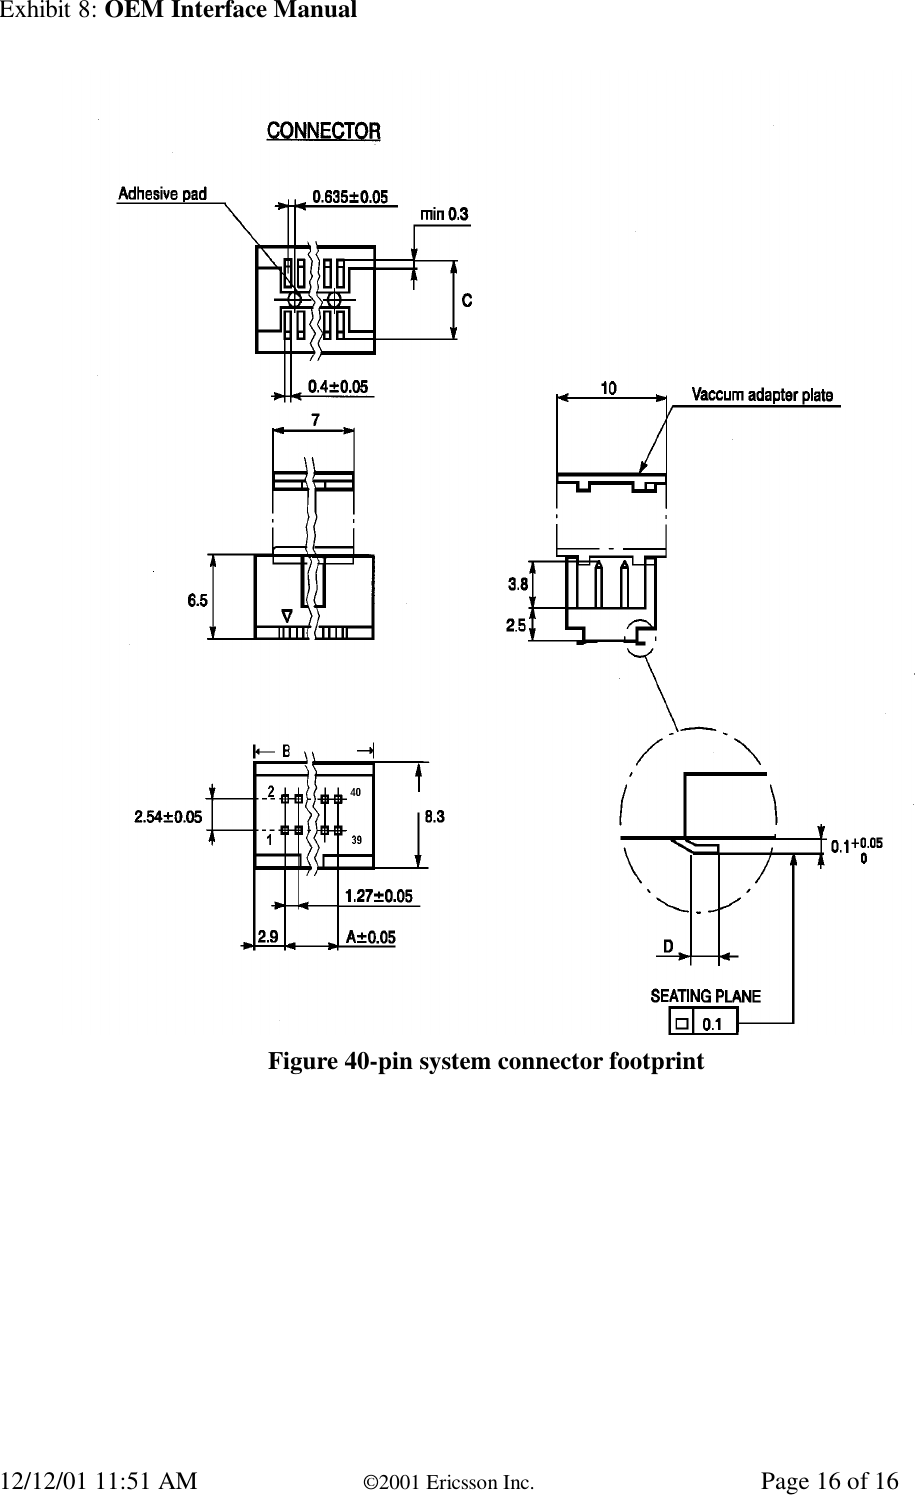 Exhibit 8: OEM Interface Manual12/12/01 11:51 AM ©2001 Ericsson Inc. Page 16 of 16Figure 40-pin system connector footprint